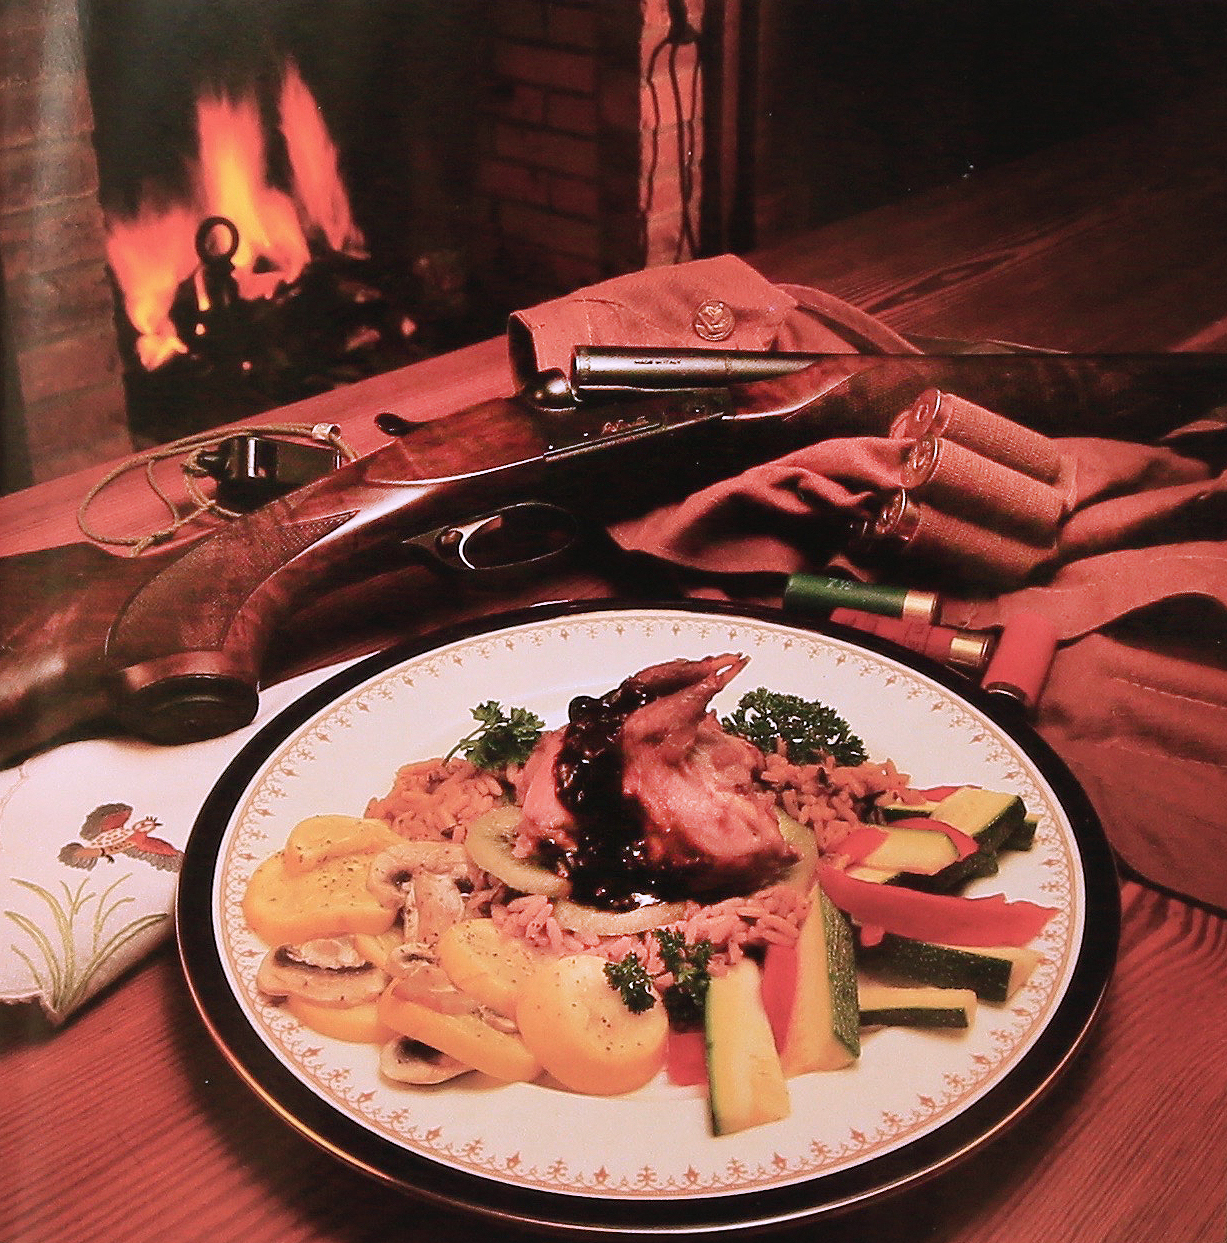 Fall 1991: This Southern cuisine of quail, wild rice, and aromatic assortment of steamed vegetables along with kiwi fruit is set in a classic atmosphere at the Gantt farmhouse. “This shot with the fireplace and shotgun was quite a production,” Jeff Amberg says. “I charged a significant fee for it because I did everything: the planning, the shopping, the cooking, the styling, everything.” 